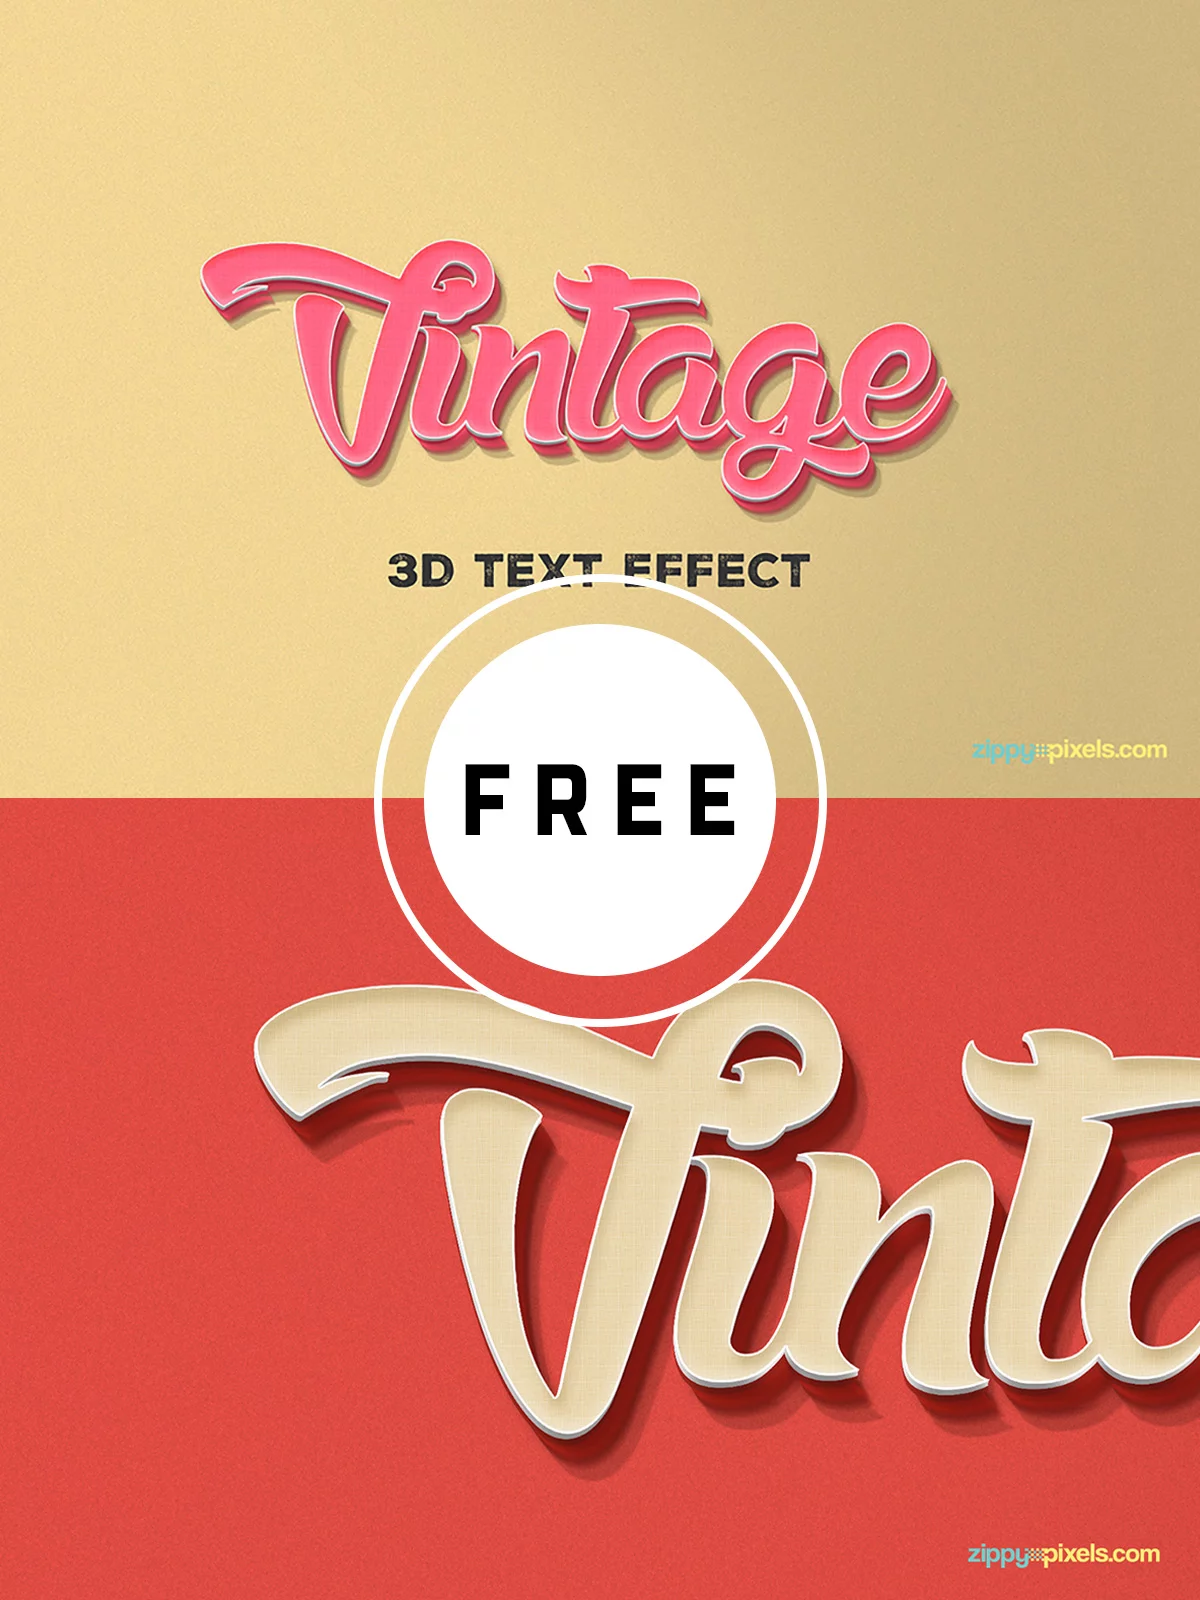 FREE PSD 3D TEXT EFFECT – VINTAGE STYLE